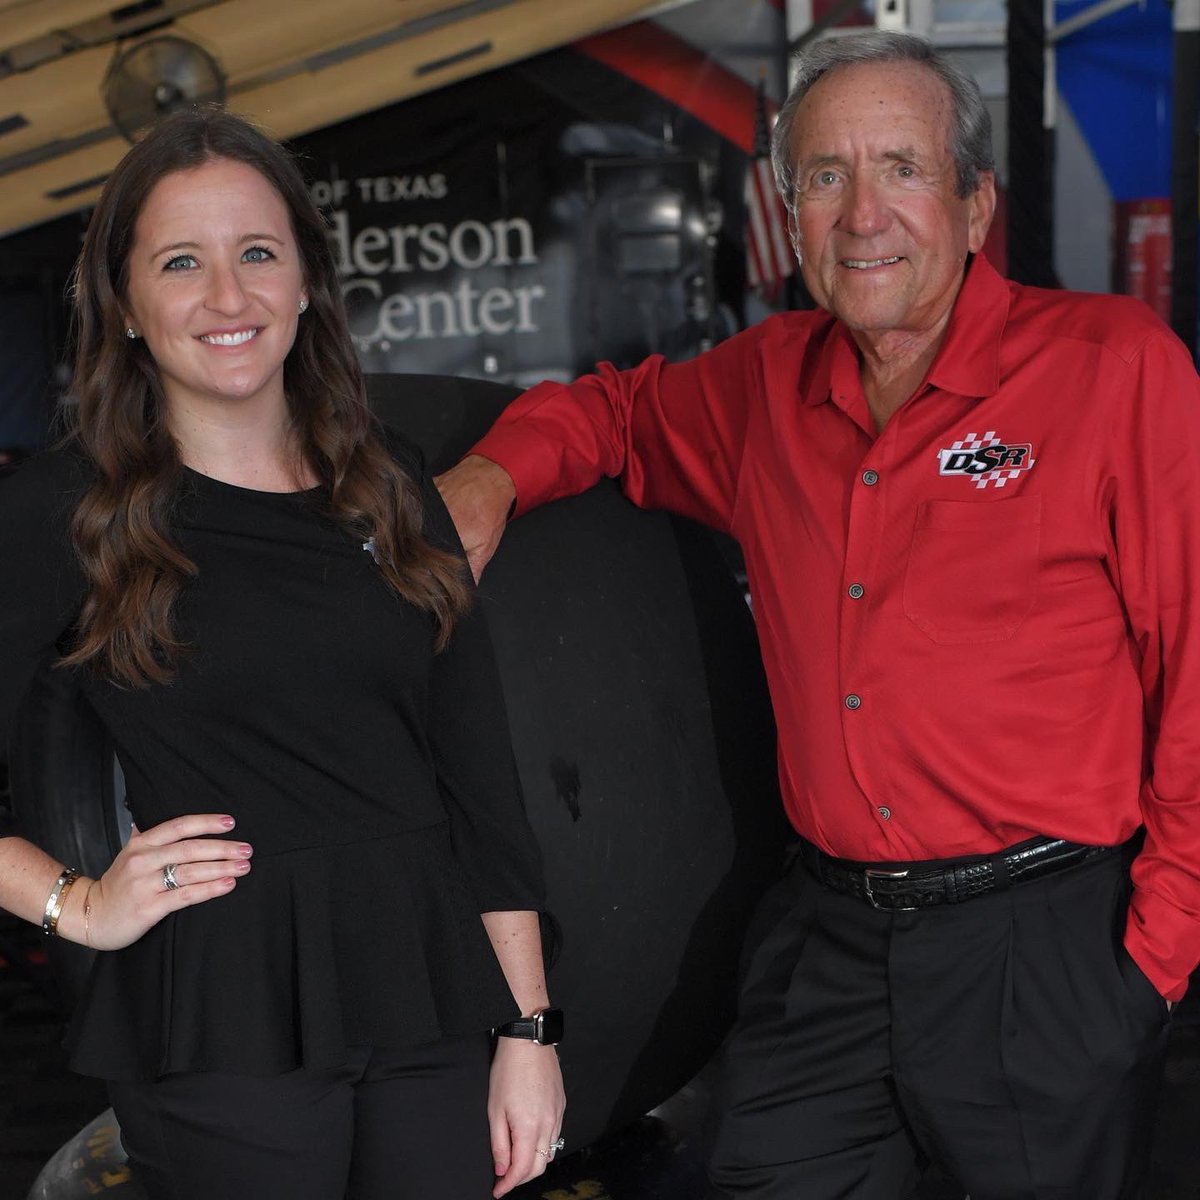 Today is a BIG day at DSR! 🎉 Help us wish our team owner, Don Schumacher, a very special #HappyBirthday! 🎂